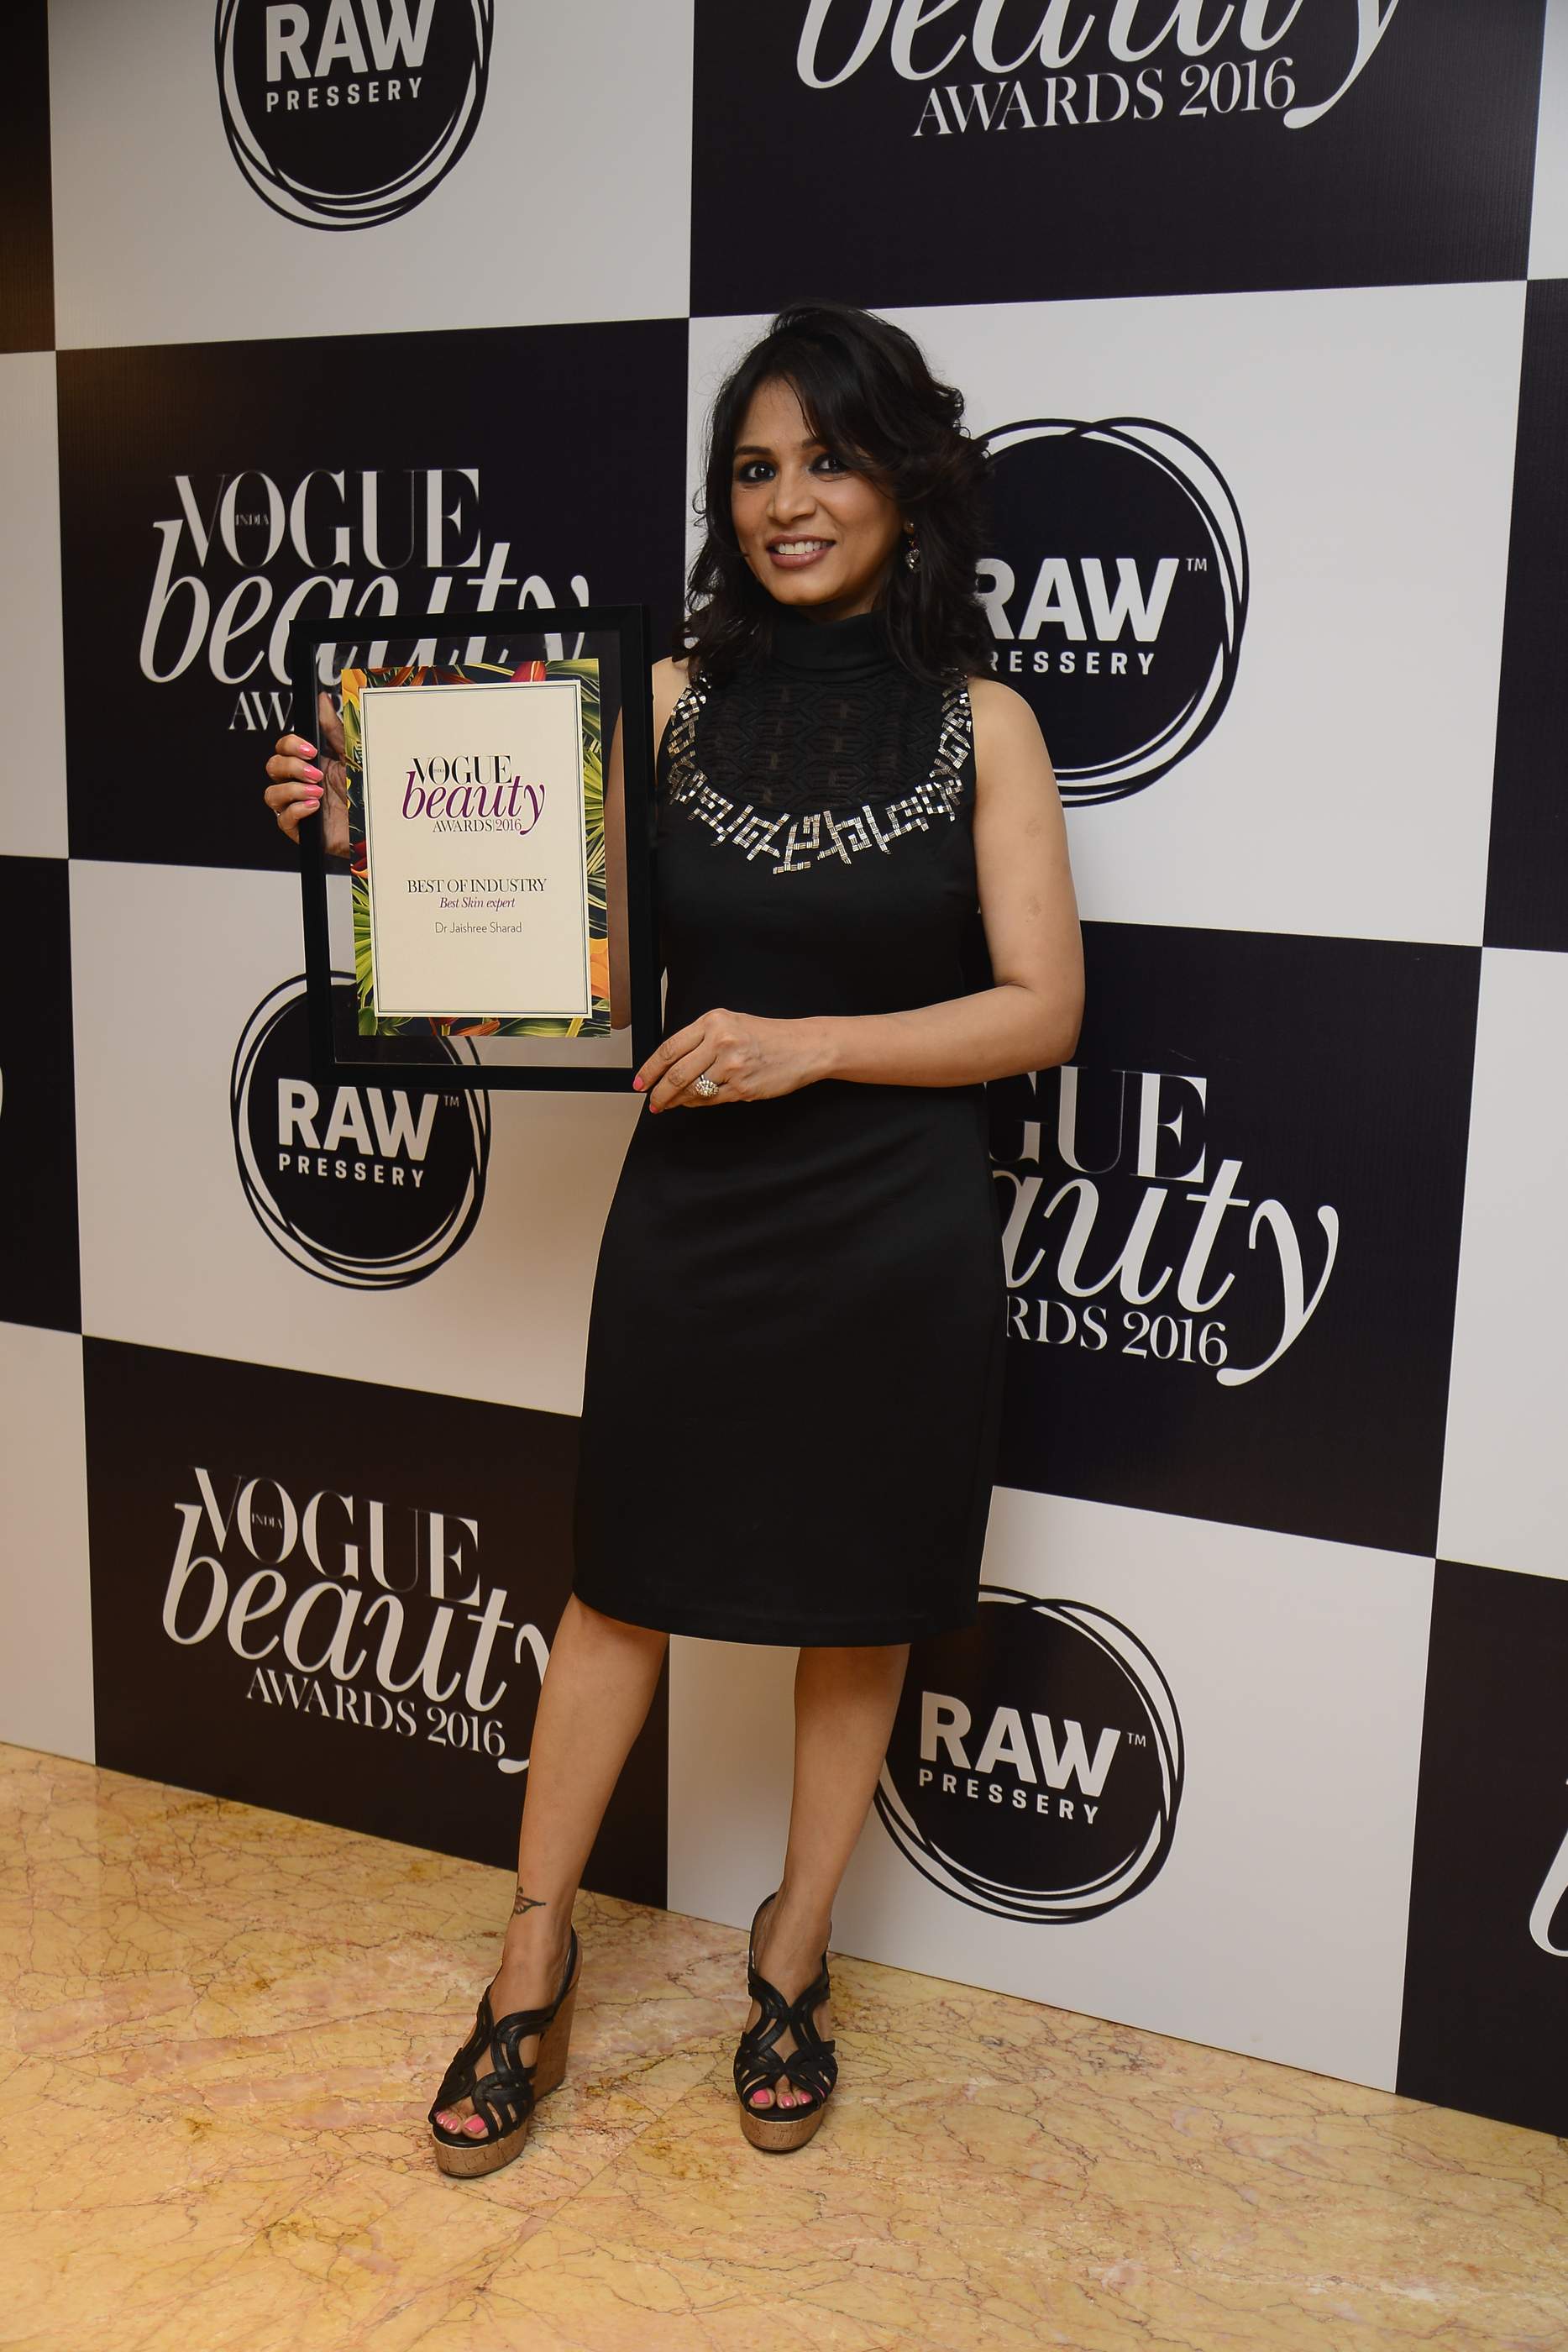 Dr. Jaishree Receiving The Best Skincare Expert Title at the Vogue Beauty Awards in 2016.